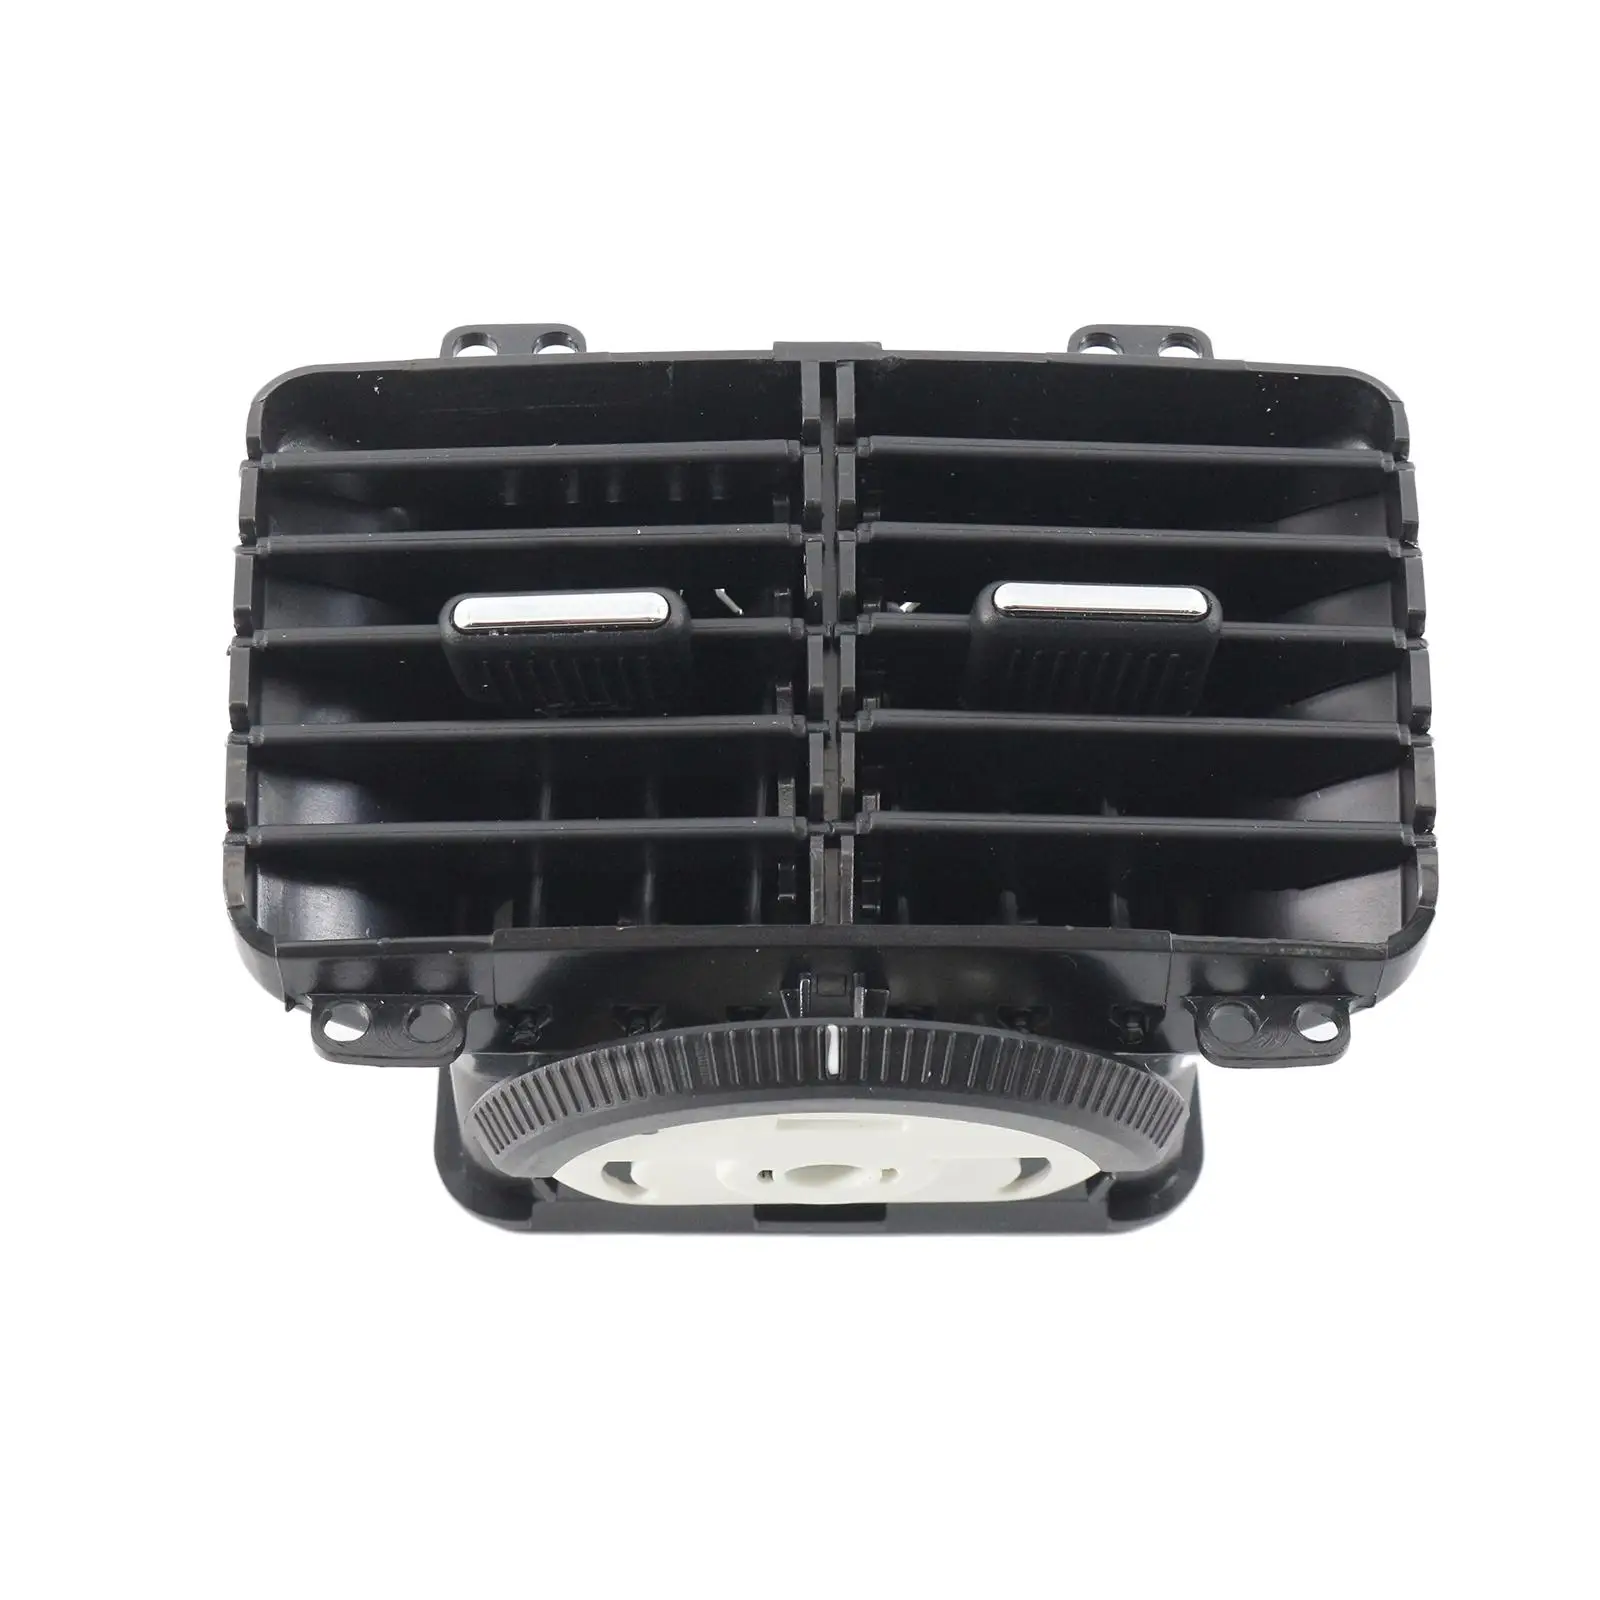 Vehicle Rear Air Outlet Vent Assembly 1K0819203A 1KD 819 203 for VW Golf MK5 MK6 Rabbit GTI Accessory Easy Installation